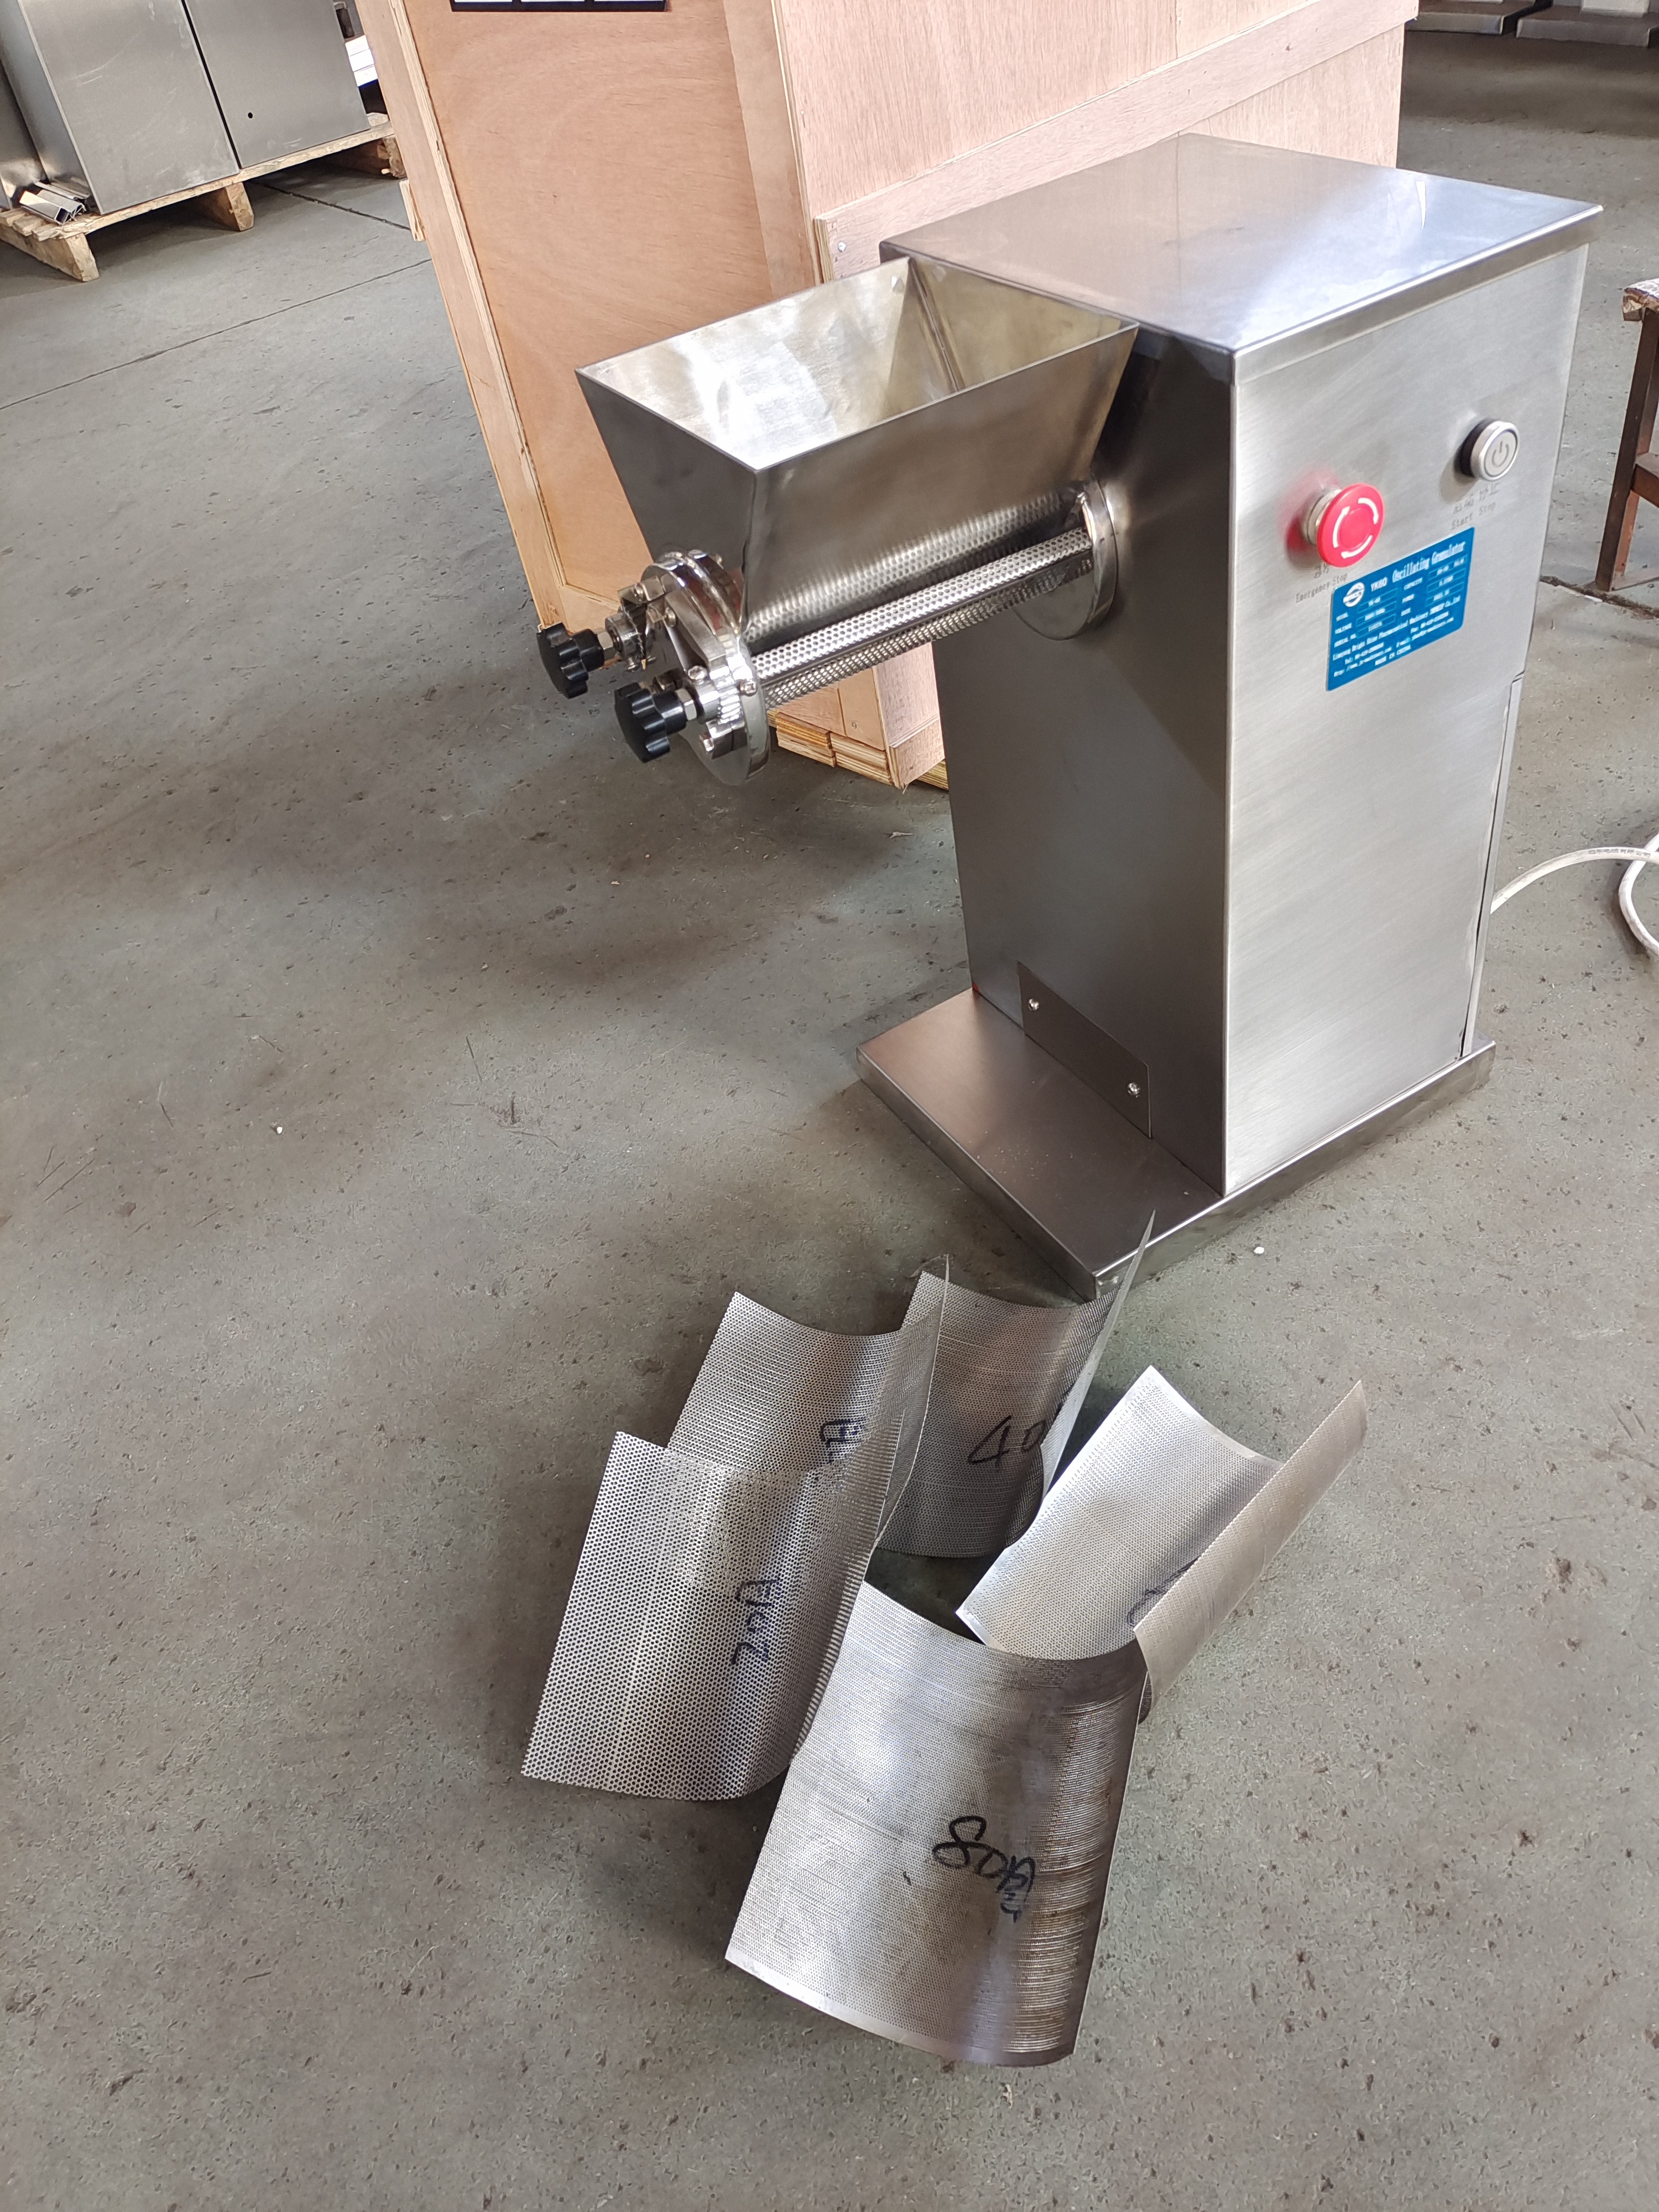 Yk60/90/160 High Quality Granulator machine with SUS304 Stainless Steel GMP Standard for Sale